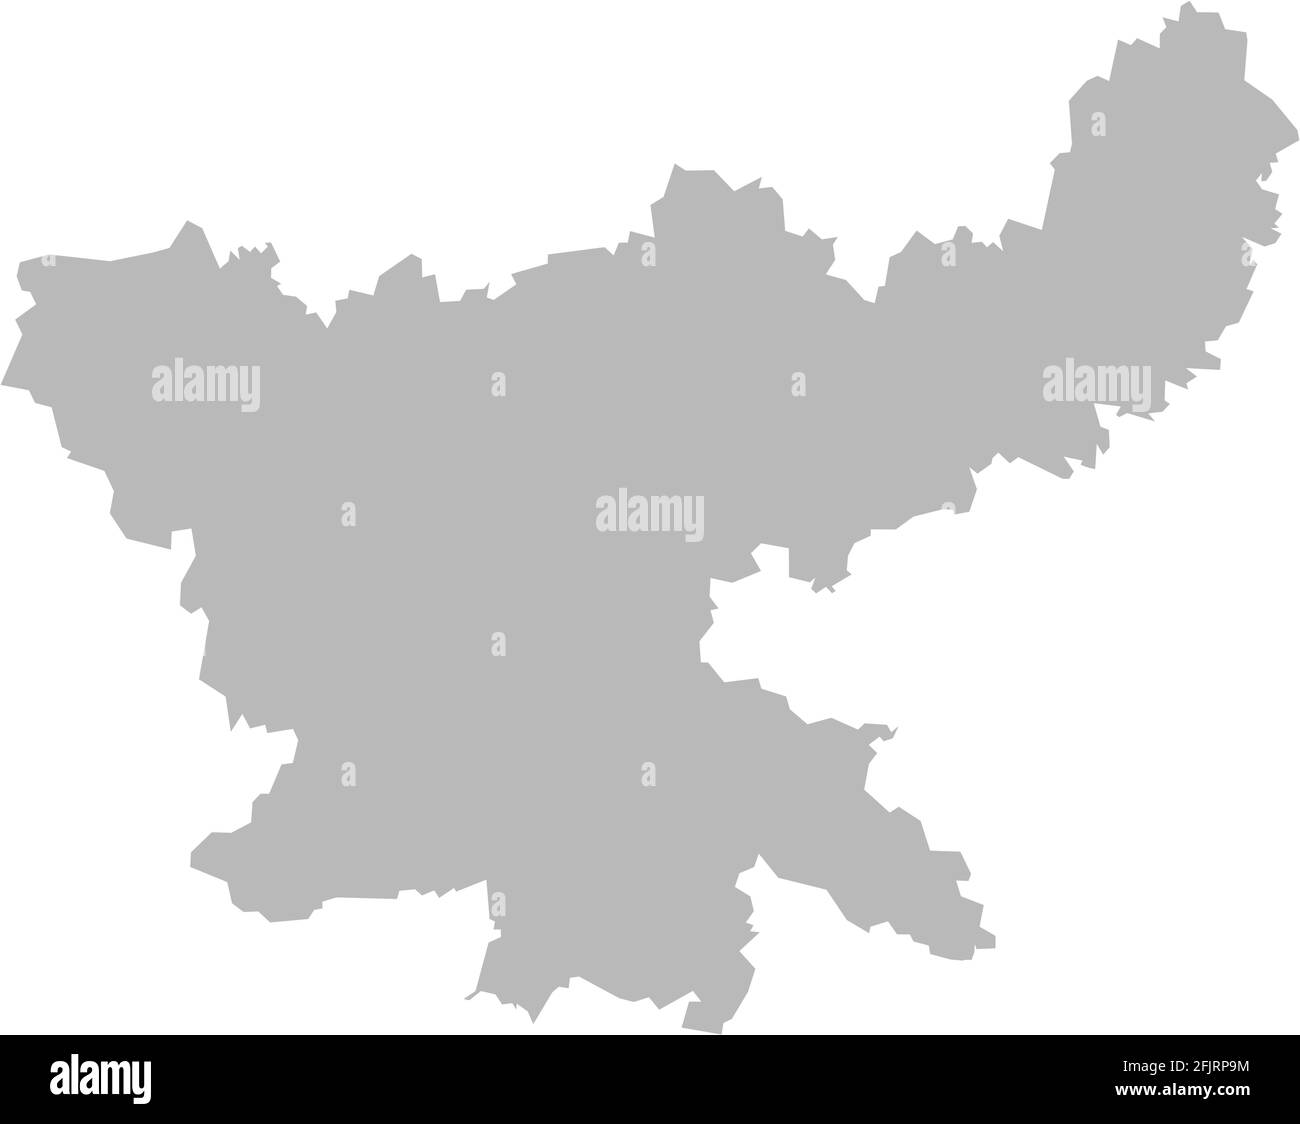 Jharkhand indian state map. Light gray background. Business concepts graphics design. Stock Vector